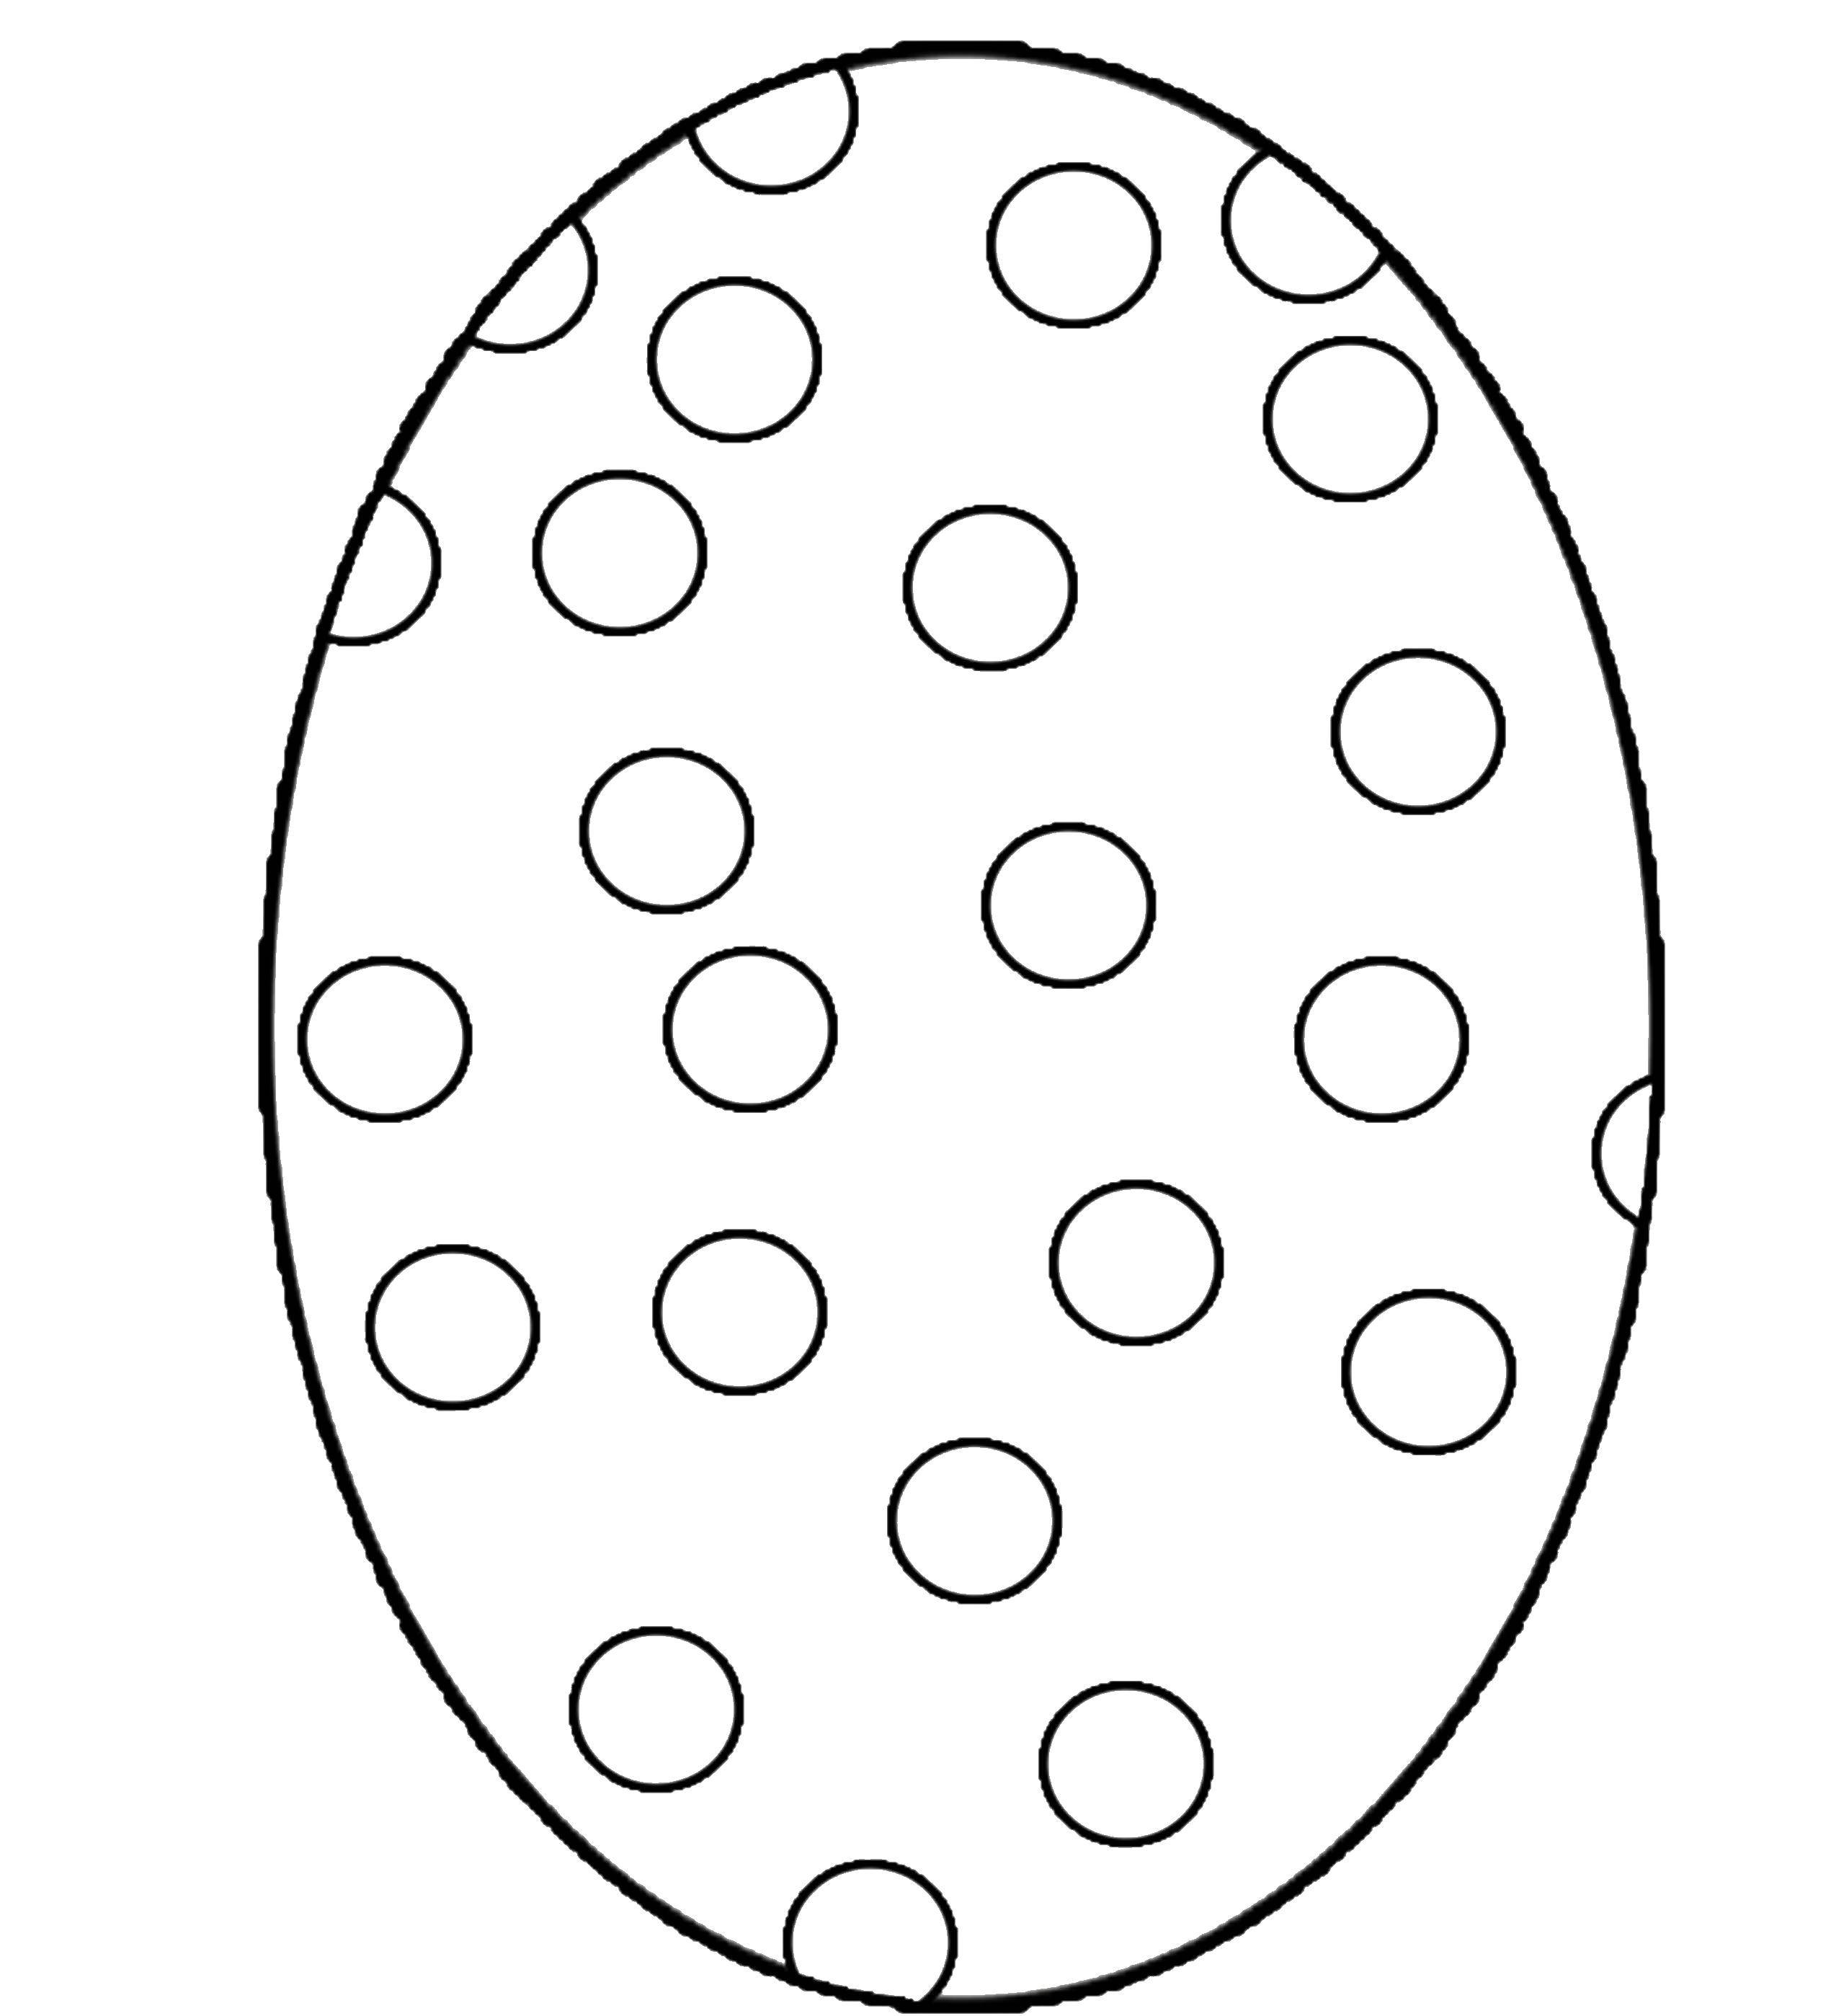 Coloring The egg is speckled.. Category Patterns for coloring eggs. Tags:  Easter, eggs, patterns.